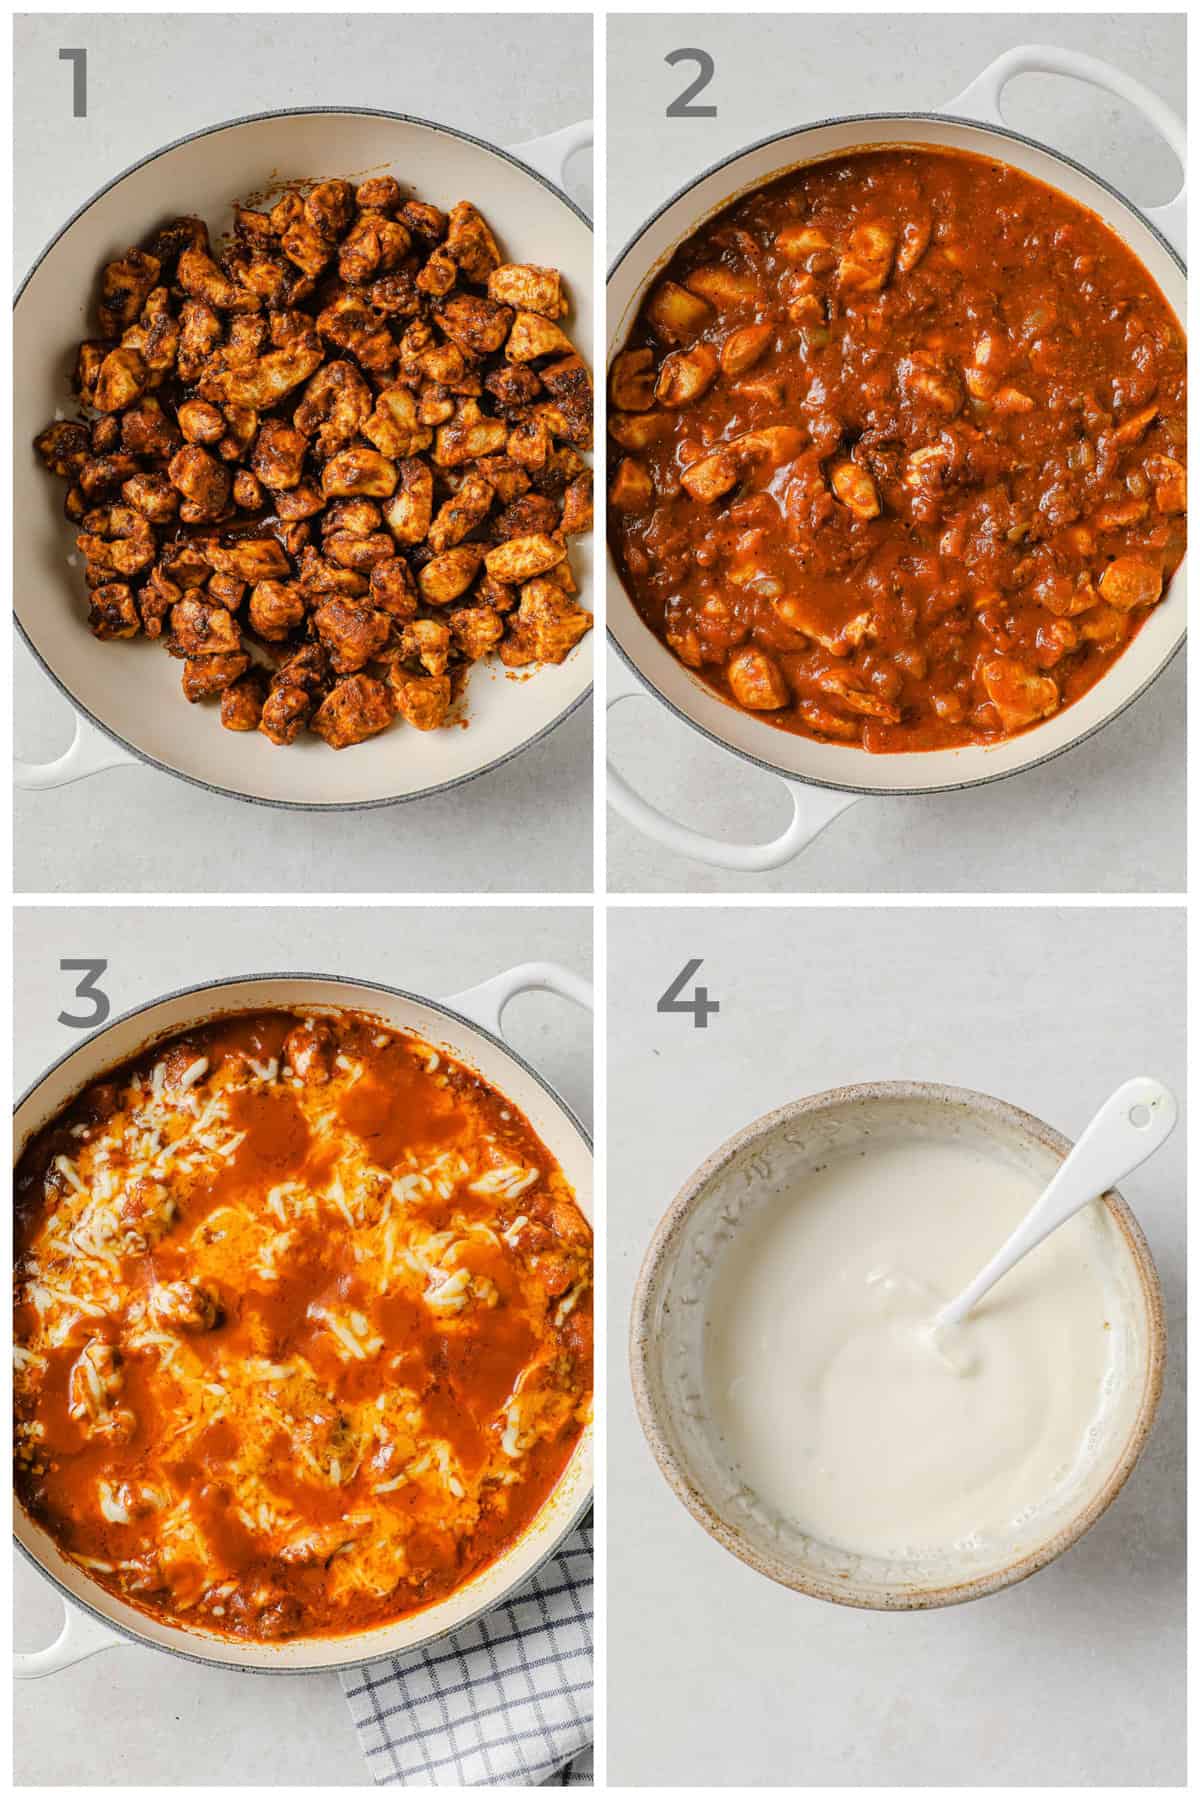 Step by step photos showing how to make homemade enchilada bowls.